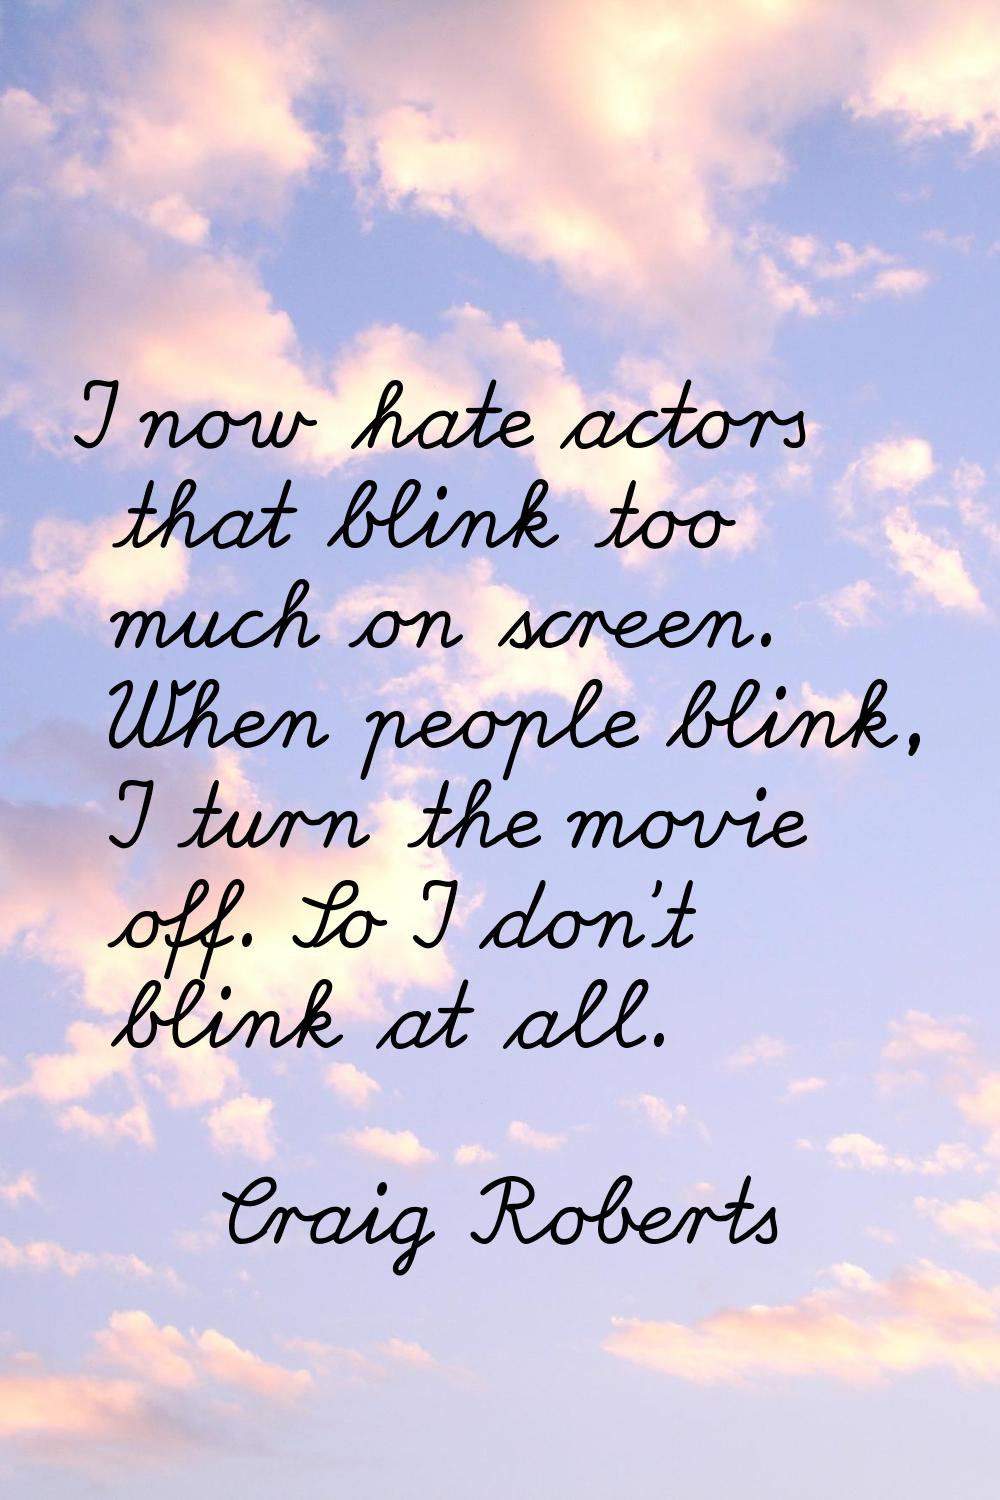 I now hate actors that blink too much on screen. When people blink, I turn the movie off. So I don'